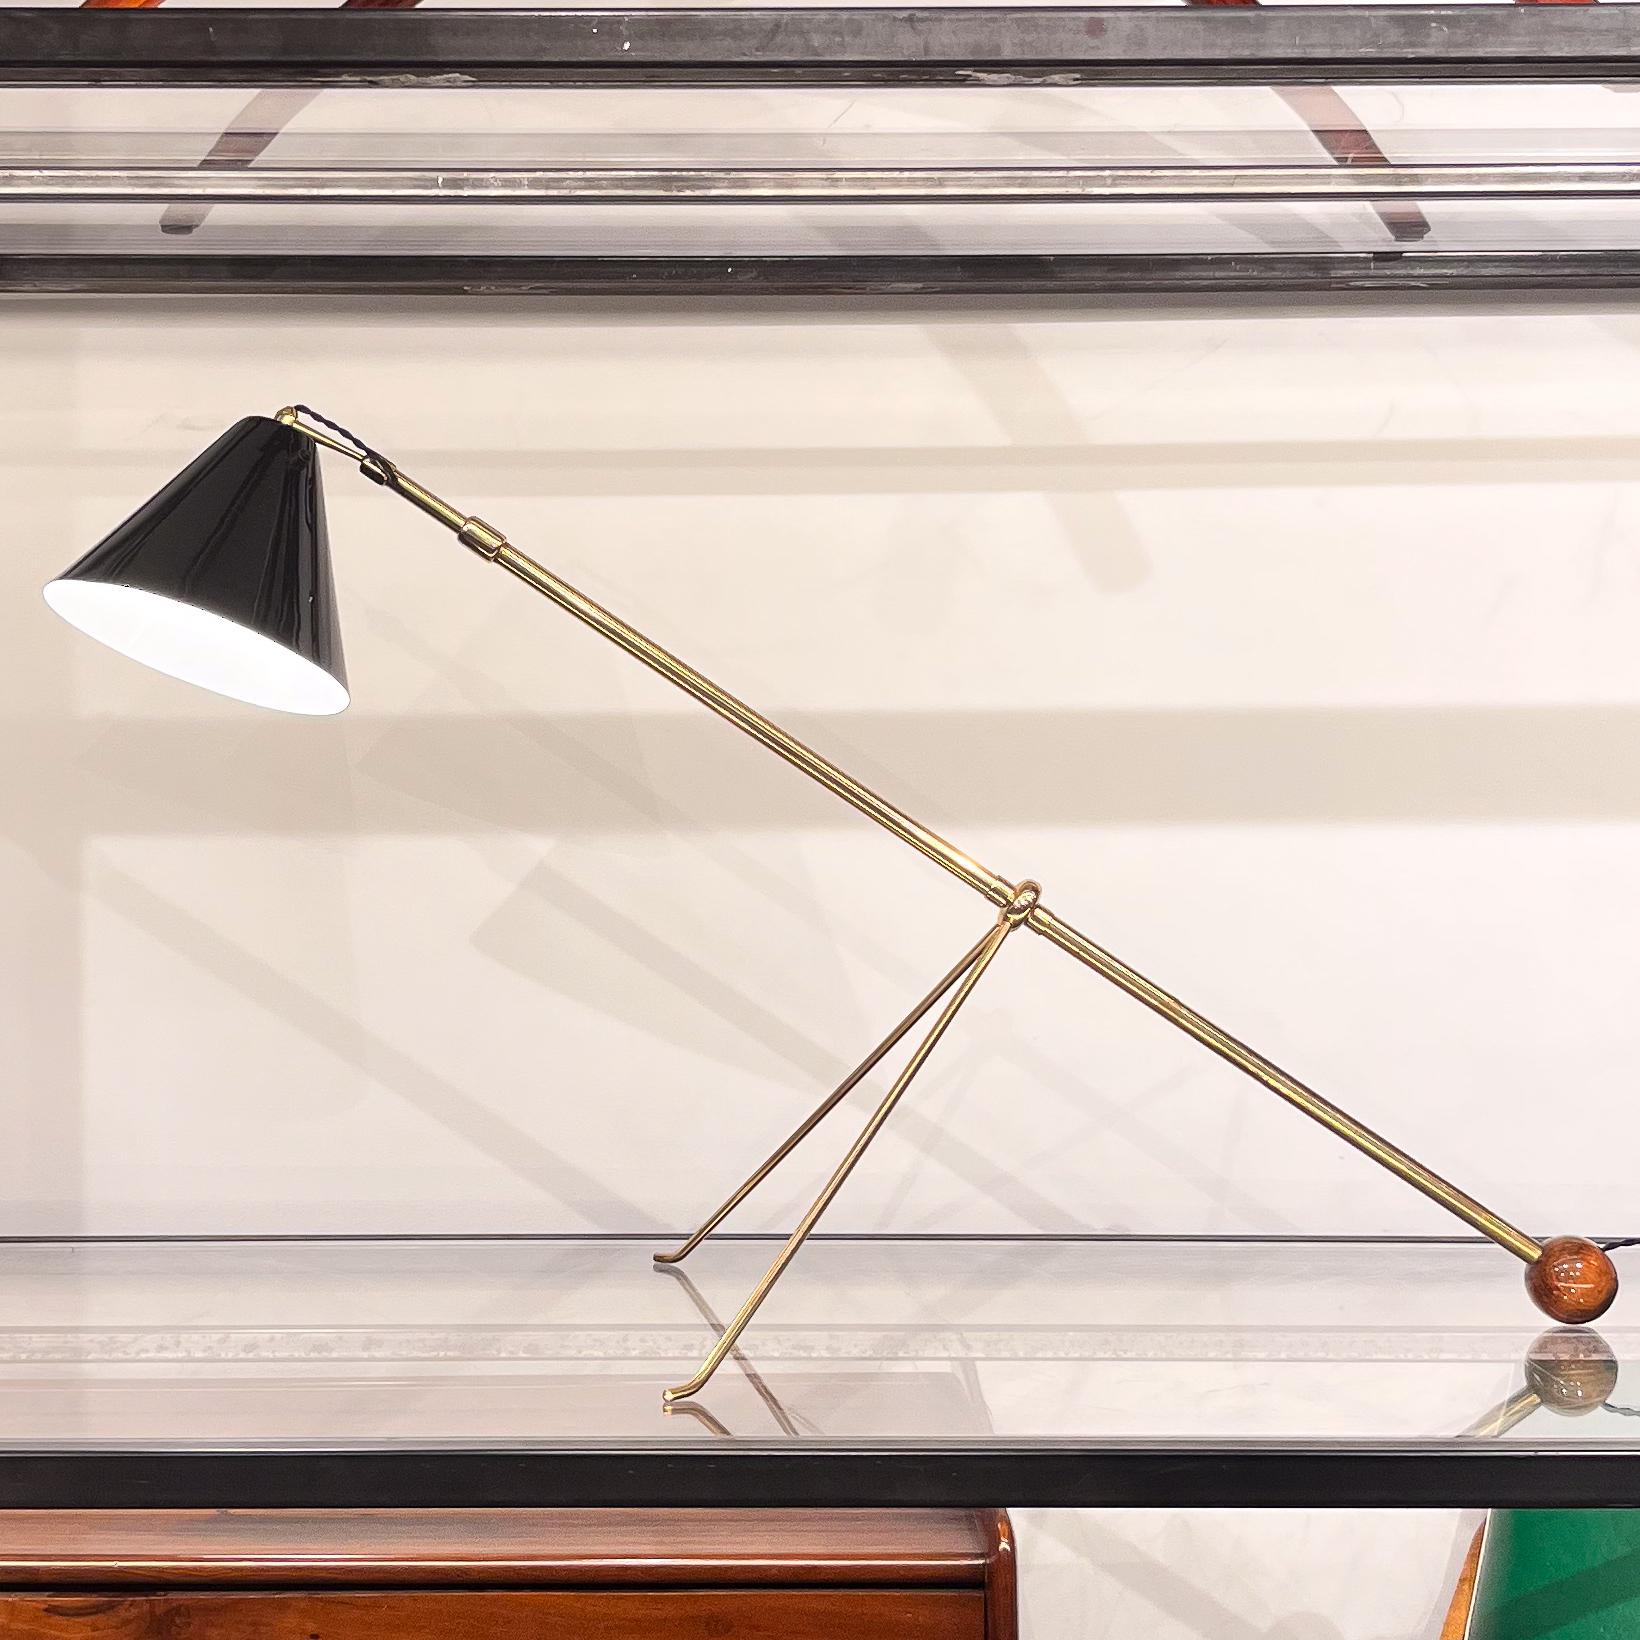 Hand-Crafted Brazilian Modern Adjustable Floor Lamp in Brass & Wood Detail, Unknown, c. 1960 For Sale